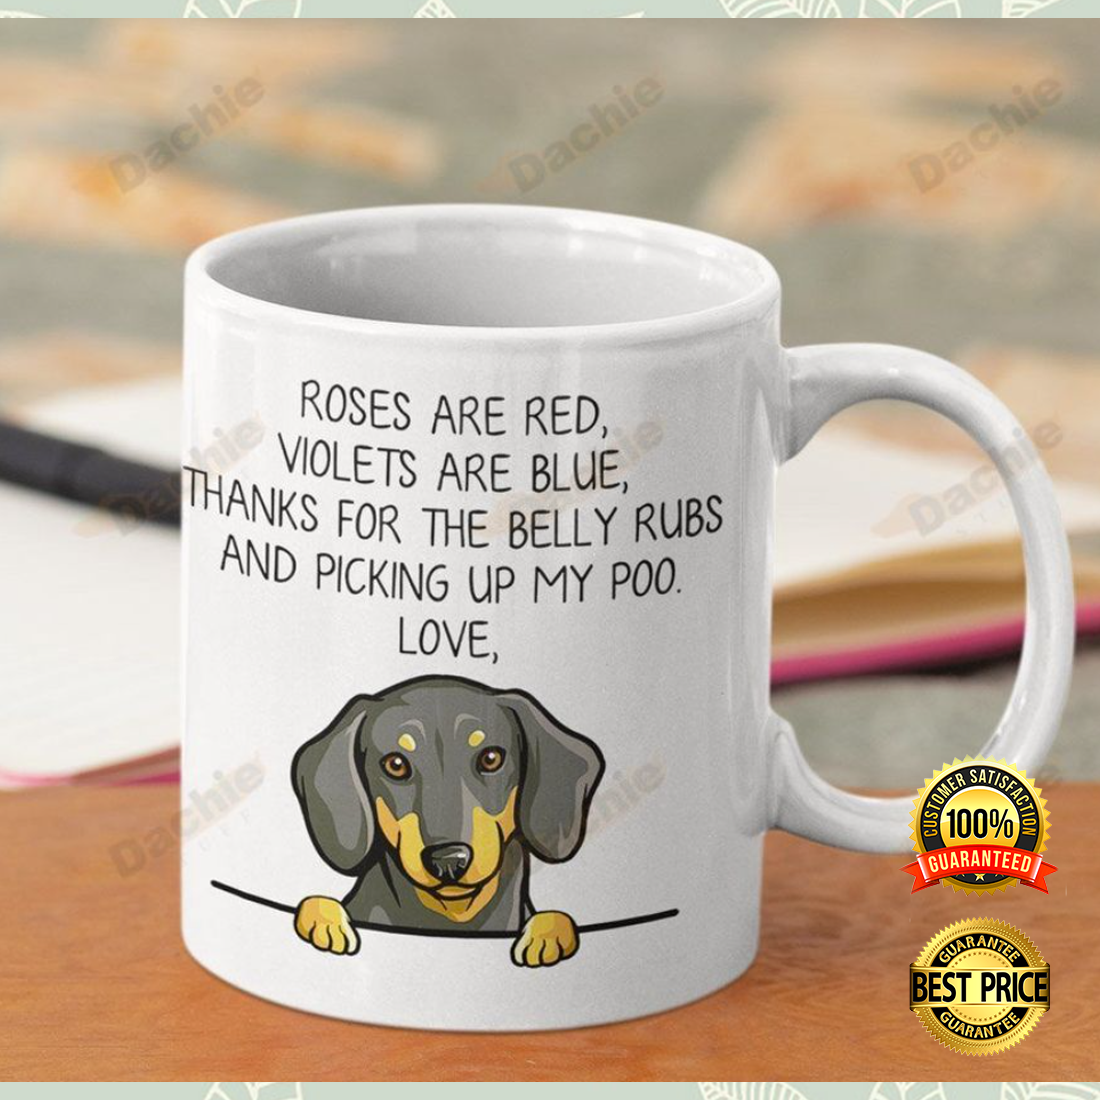 Dachshund roses are red violets are blue thanks for the belly rubs and picking up my poo mug